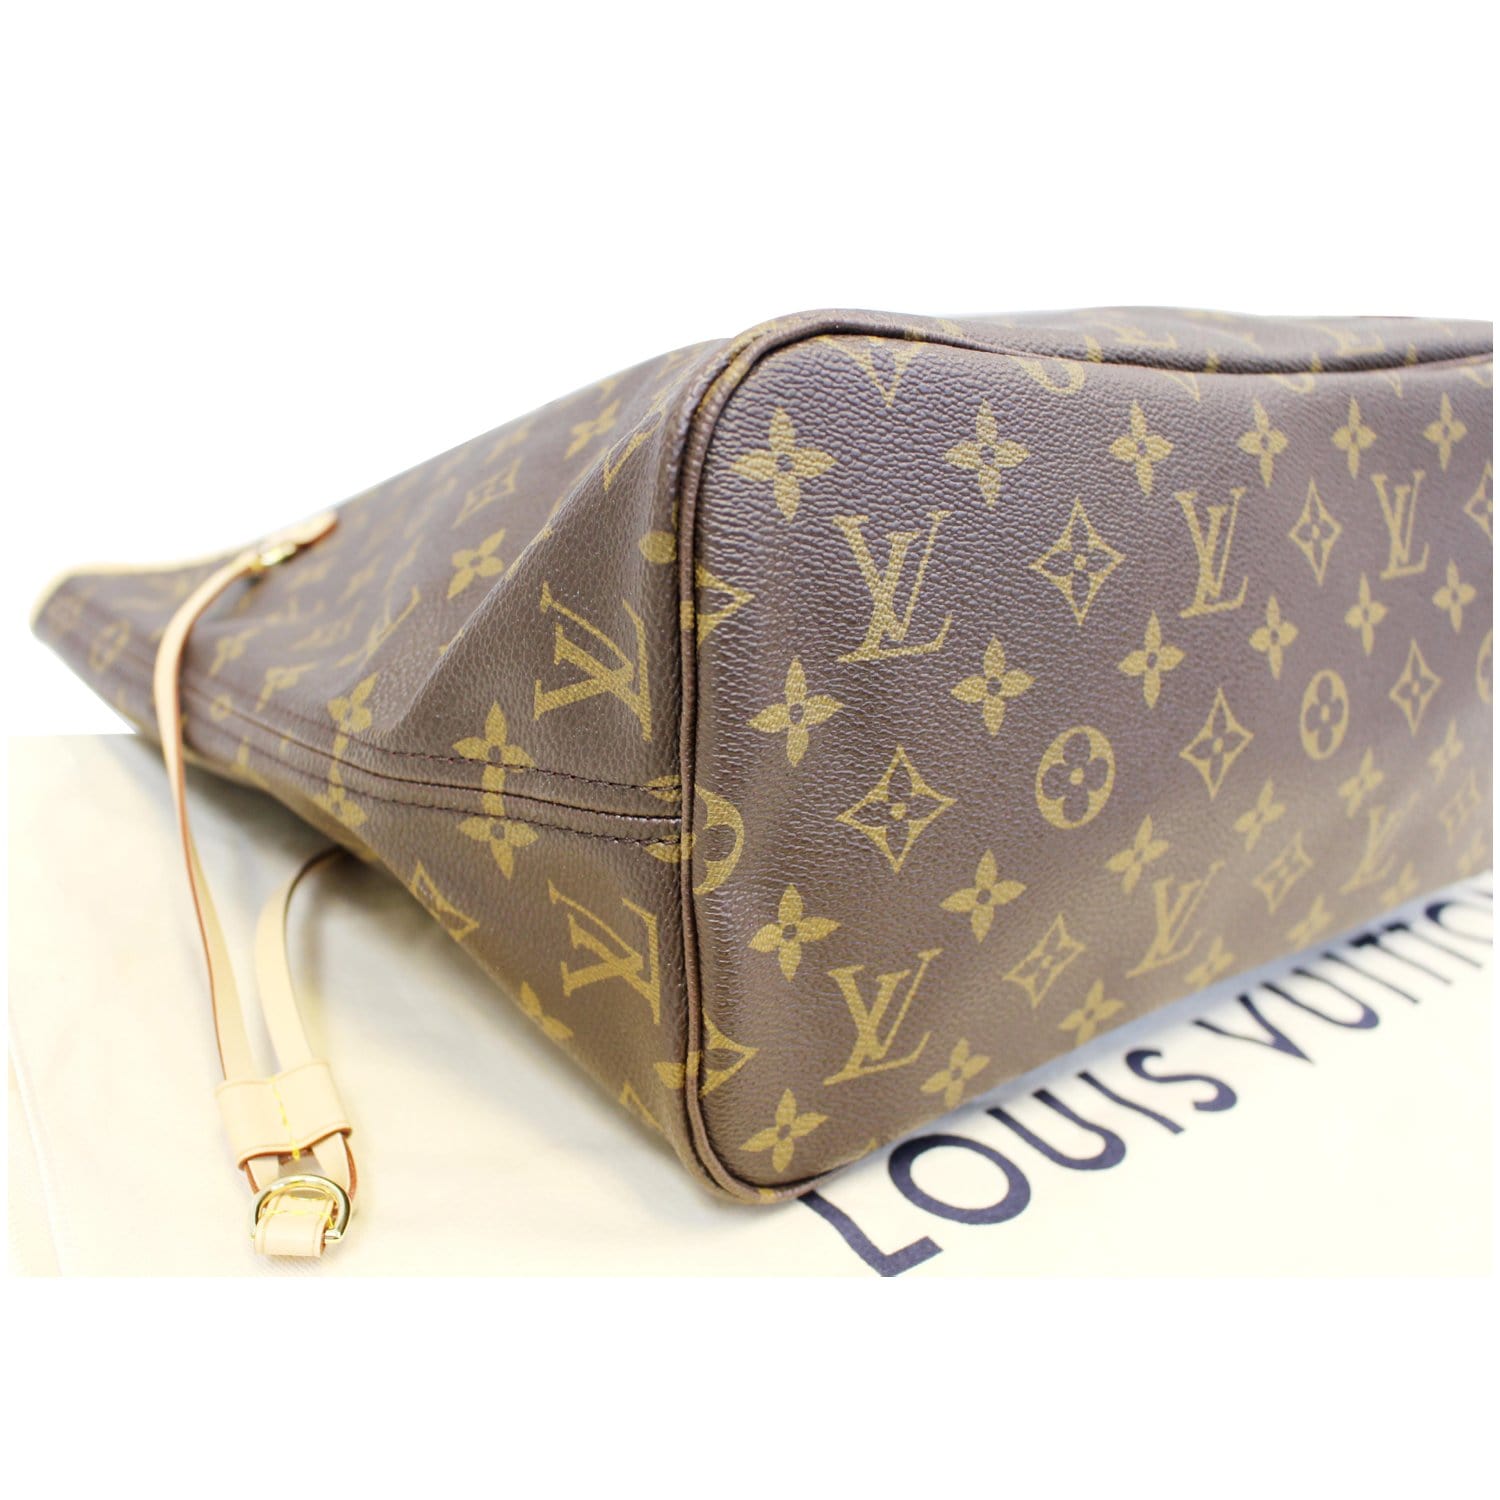 Louis Vuitton Neverfull MM Peony Monogram Leather Canvas Tote